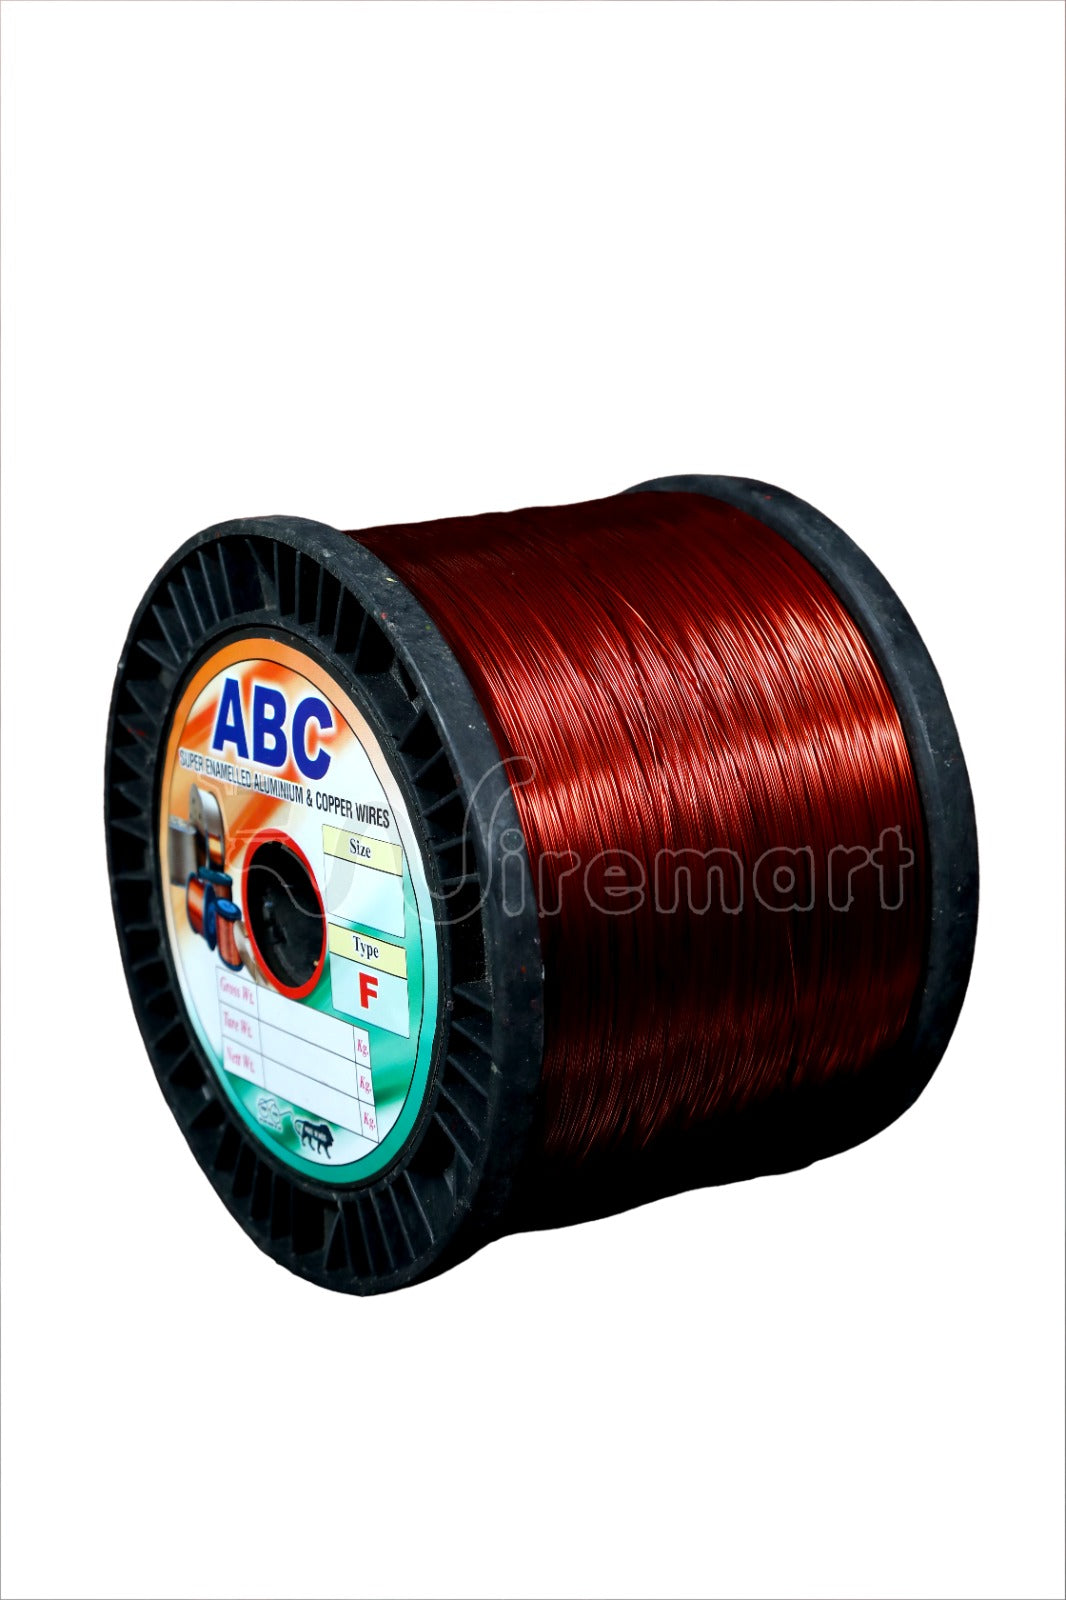 Copper Super Enameled / Winding wire -  ABC Brand